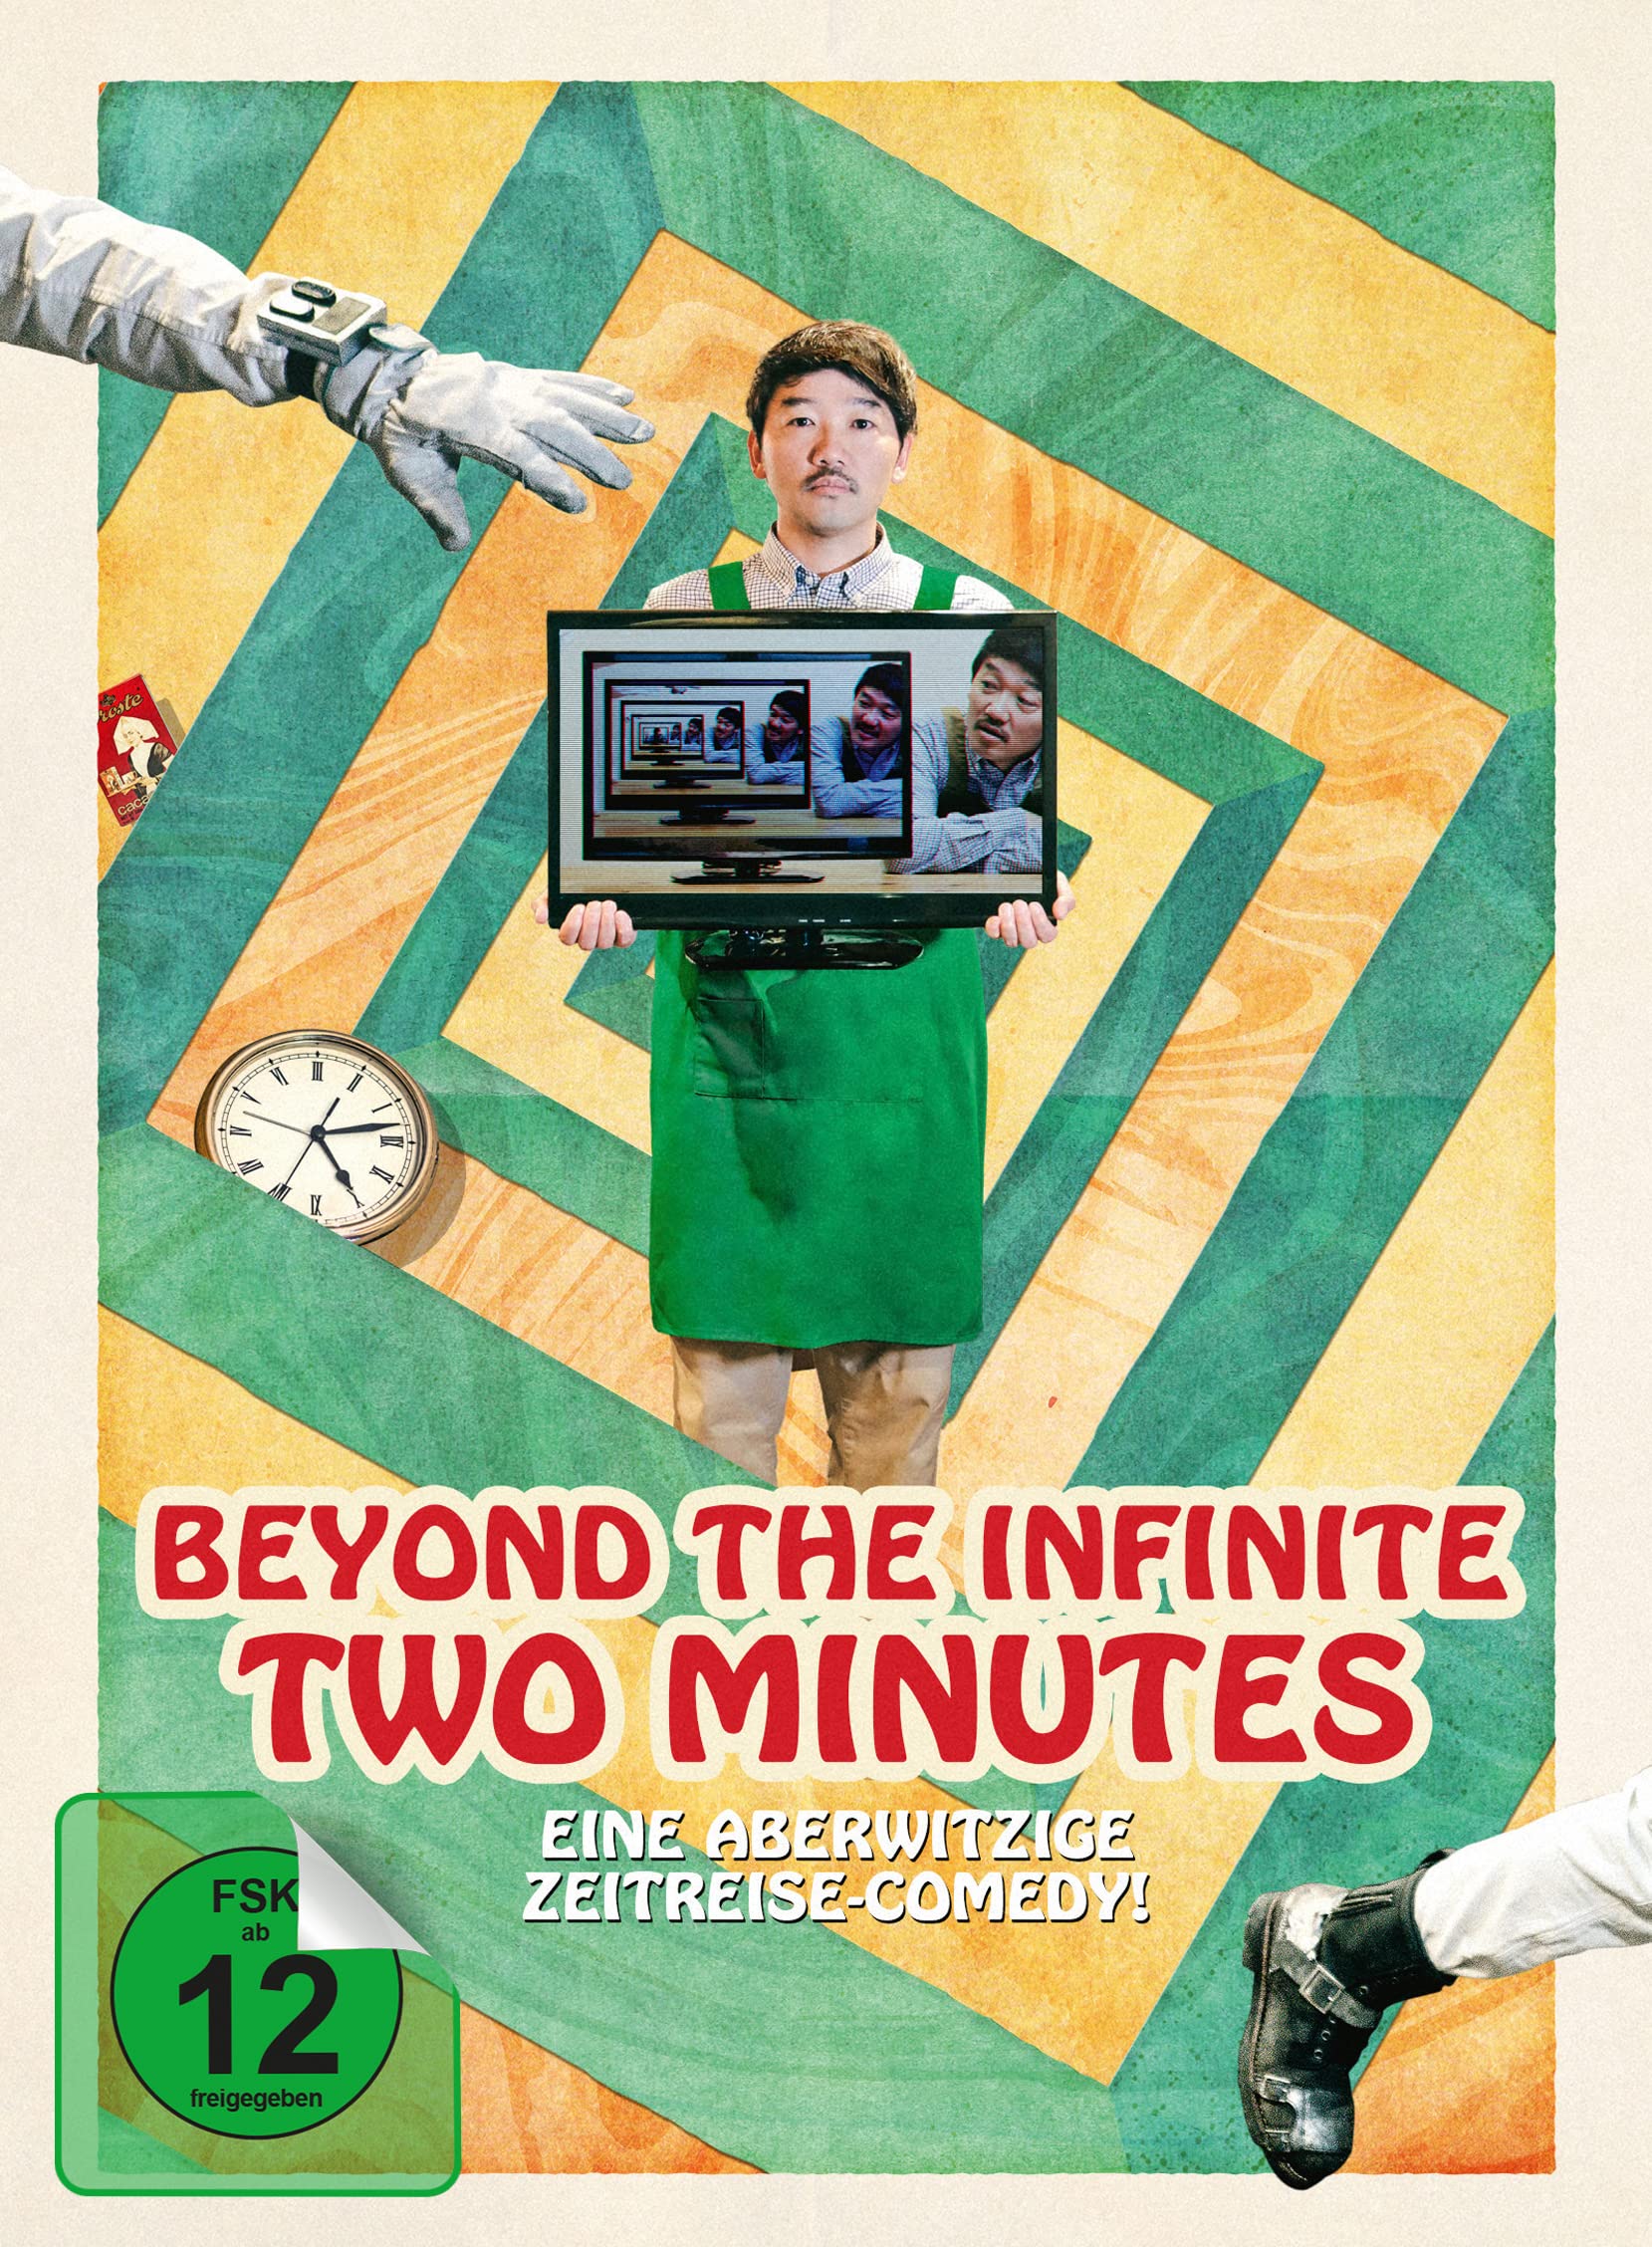 Beyond the Infinite Two Minutes - 2-Disc Limited Edition Mediabook (+ DVD) [Blu-ray]